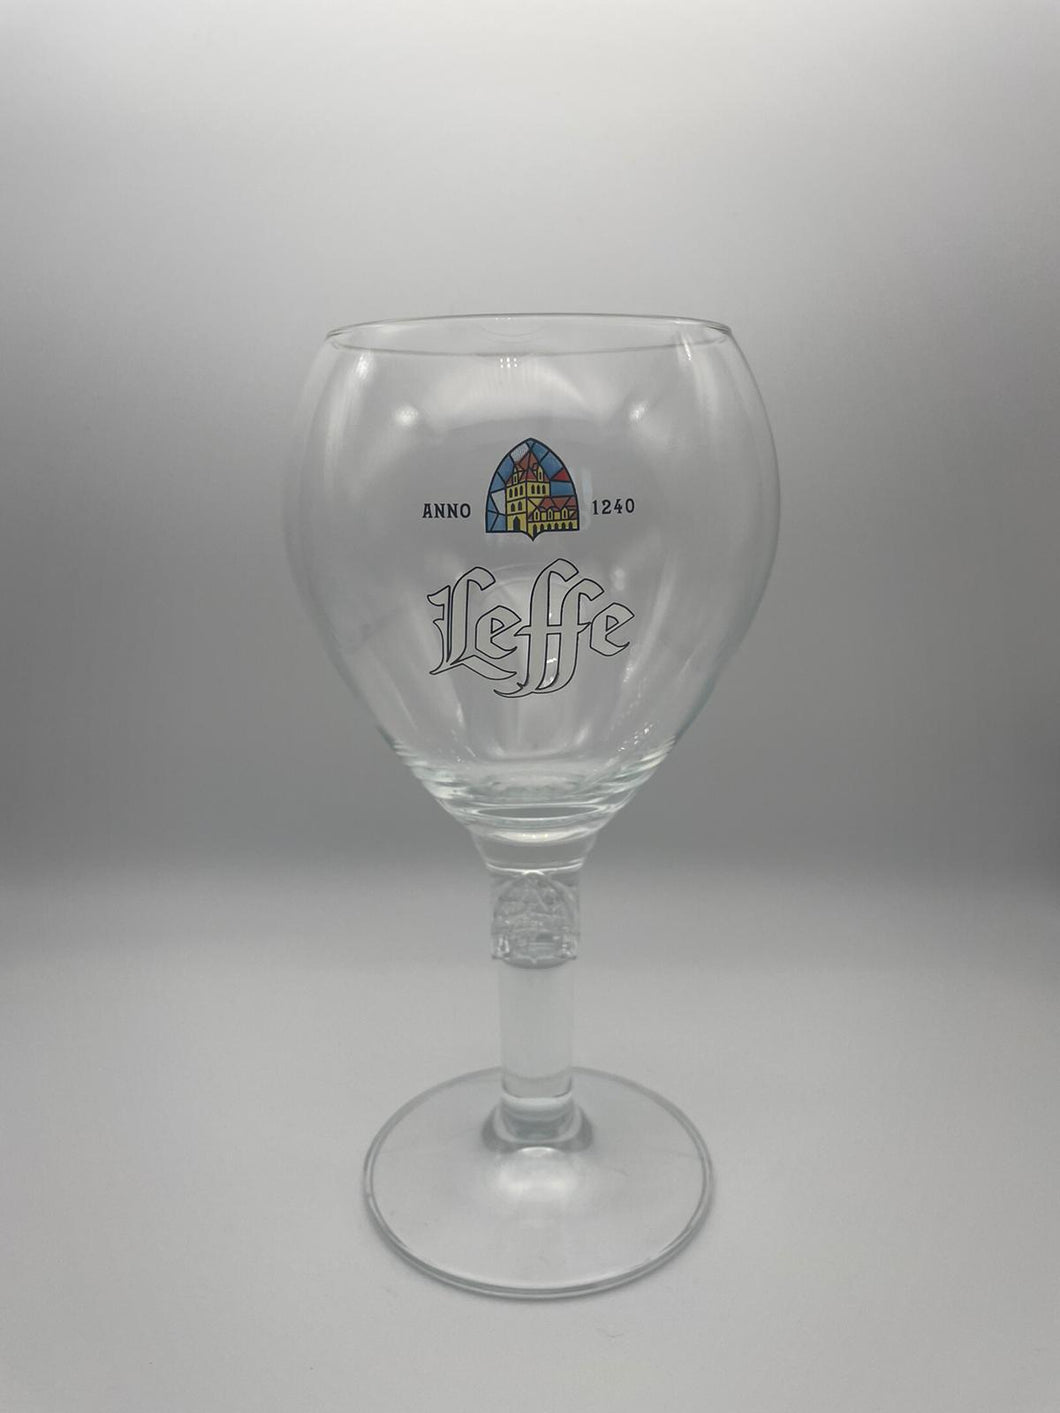 Leffe 33cl nucleated Beer Glass